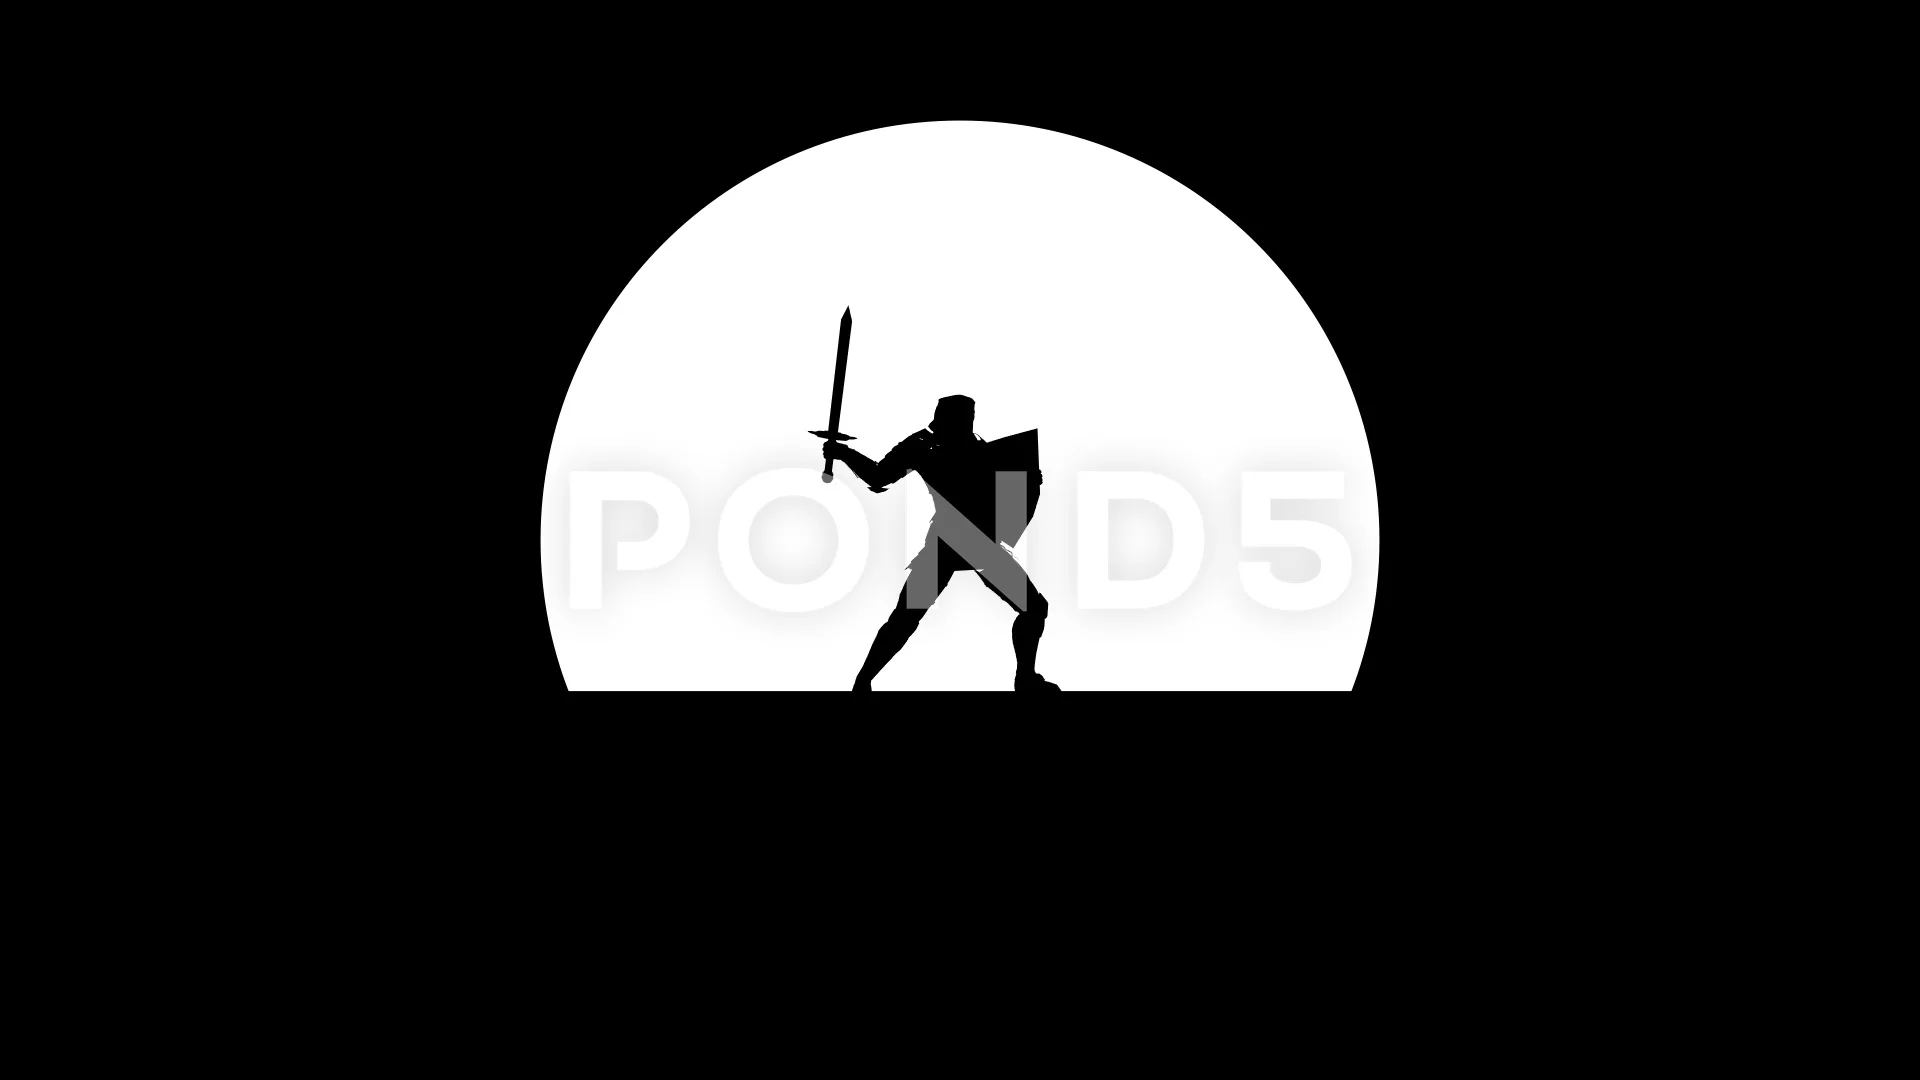 knight silhouette png